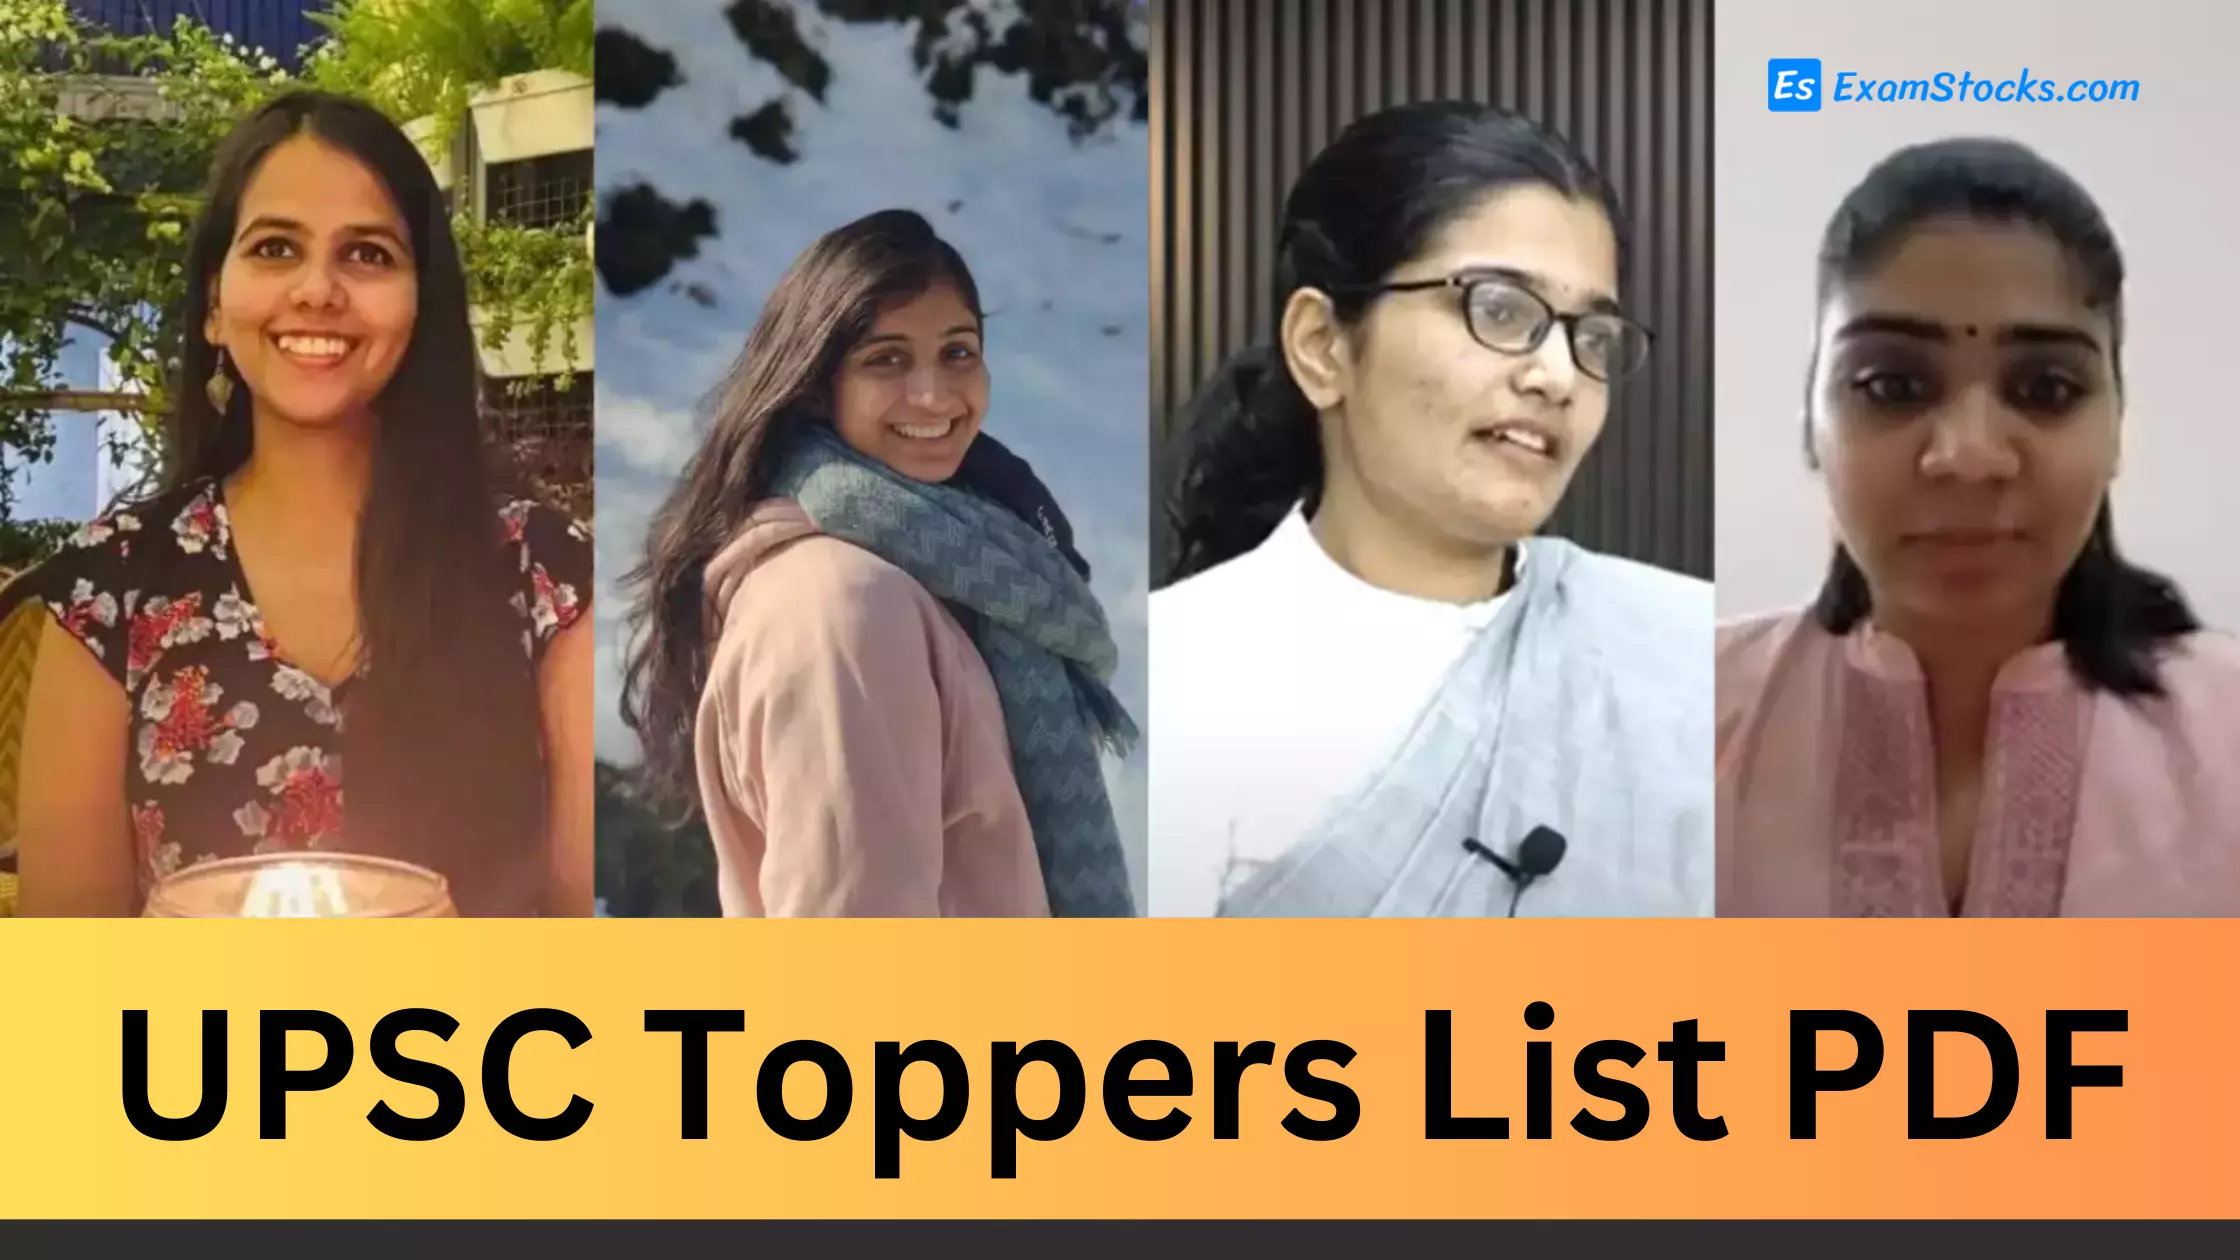 UPSC Toppers List PDF 2023, Six Girls in Top 10 Exam Stocks